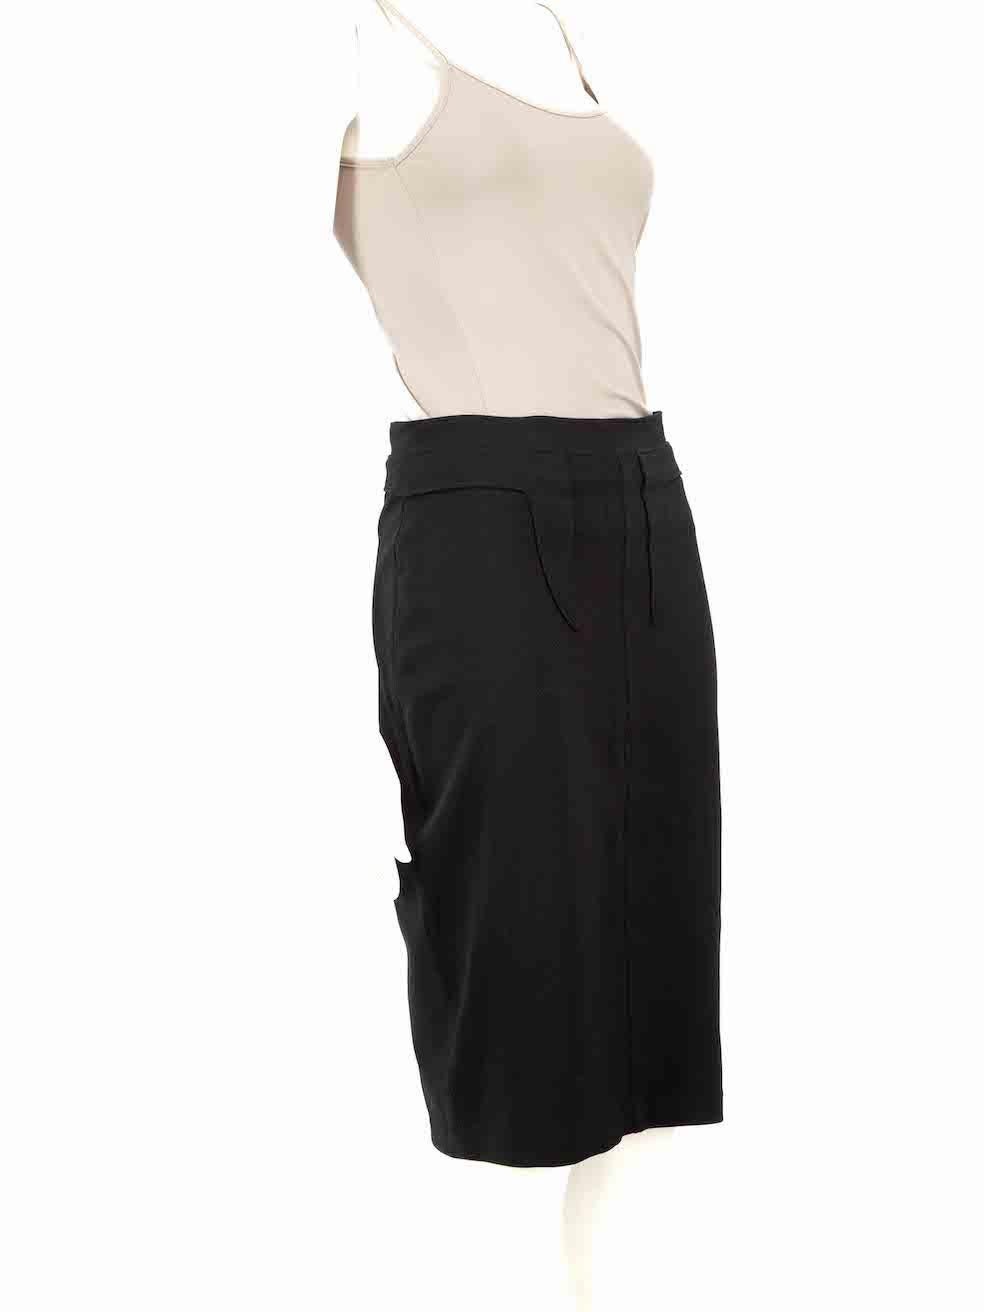 CONDITION is Very good. Hardly any visible wear to the skirt is evident. However, the sizing and composition label is missing on this used Givenchy designer resale item.
 
 
 
 Details
 
 
 Black
 
 Synthetic
 
 Pencil skirt
 
 Knee length
 
